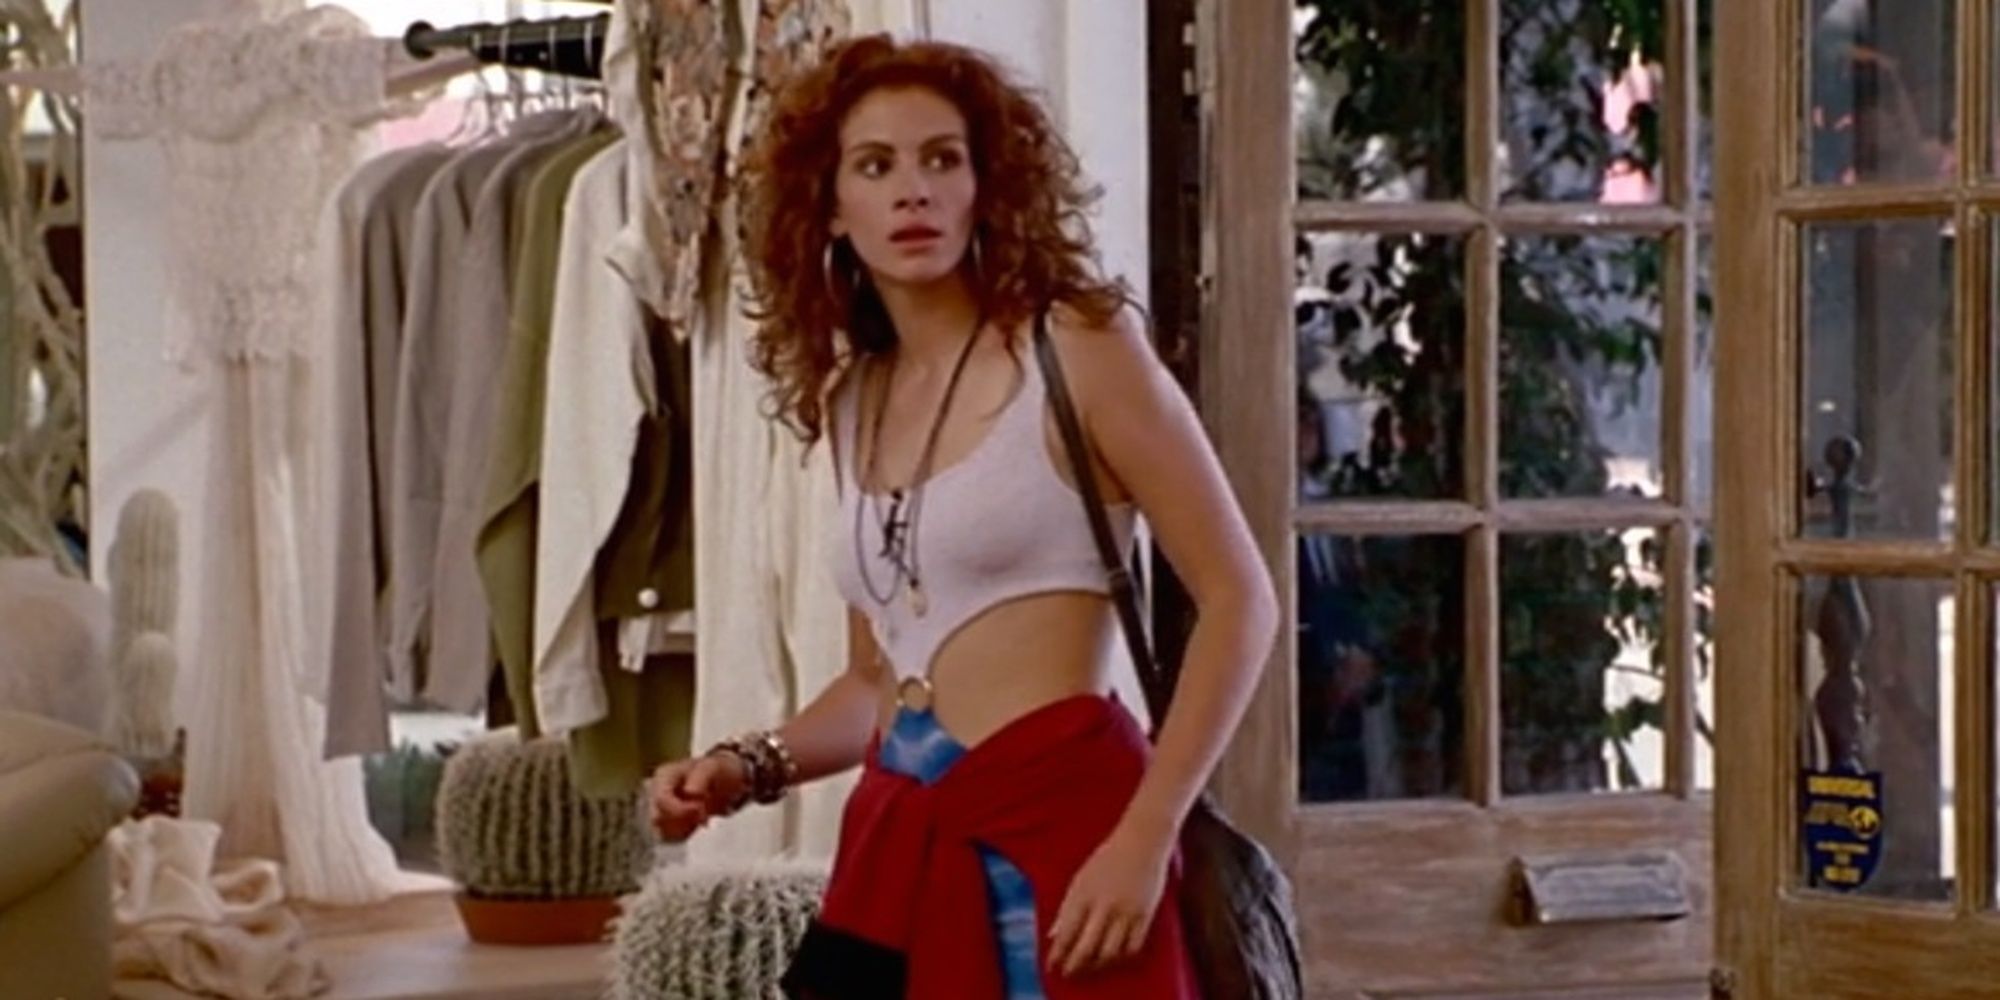 15 Best Quotes From Pretty Woman